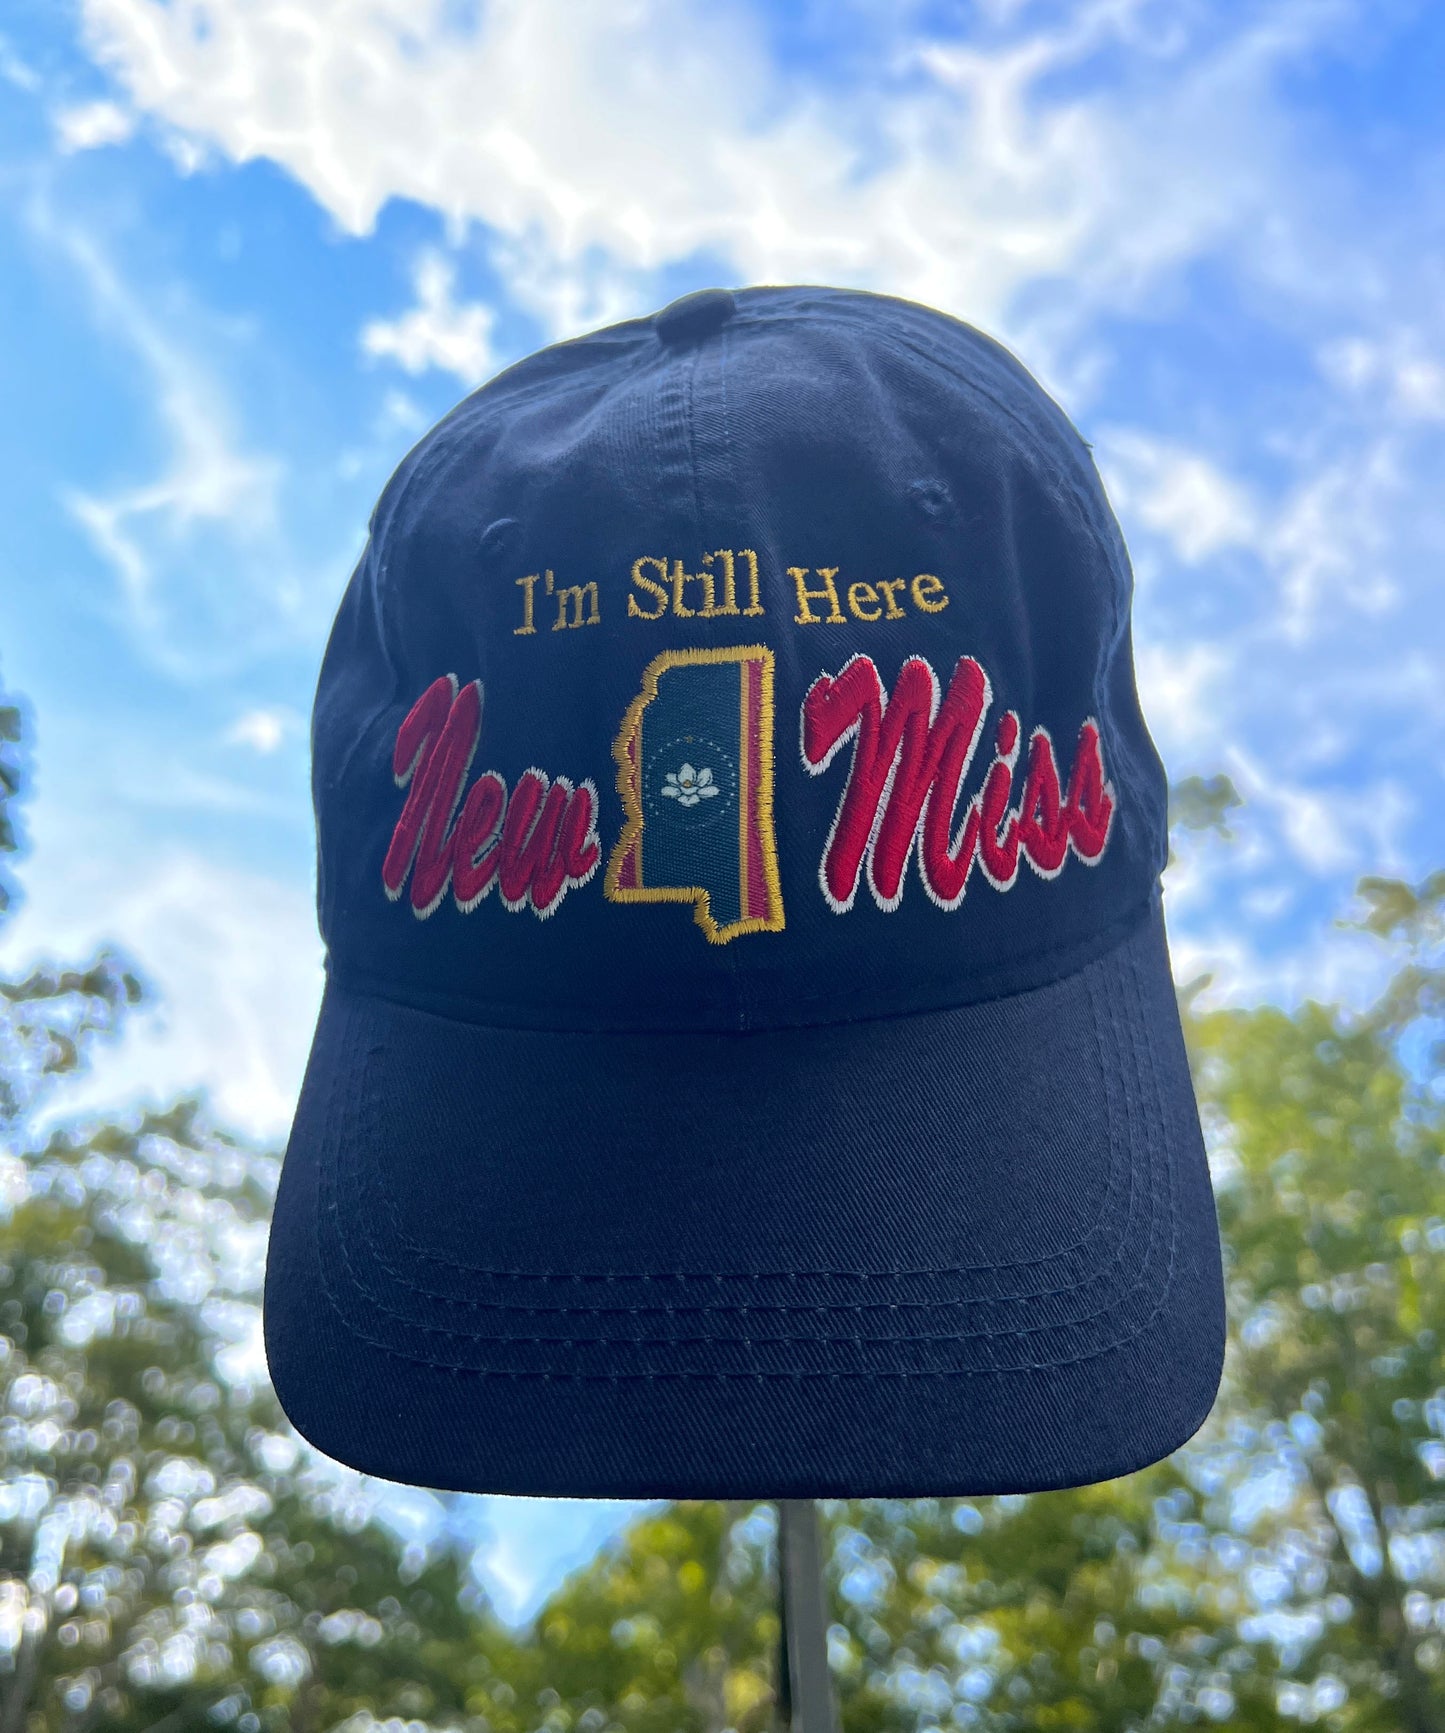 **New** " I'm Still Here"  -Limited Edition Navy Curved brim unstructured Hat featuring New Miss logo and Flag cutout